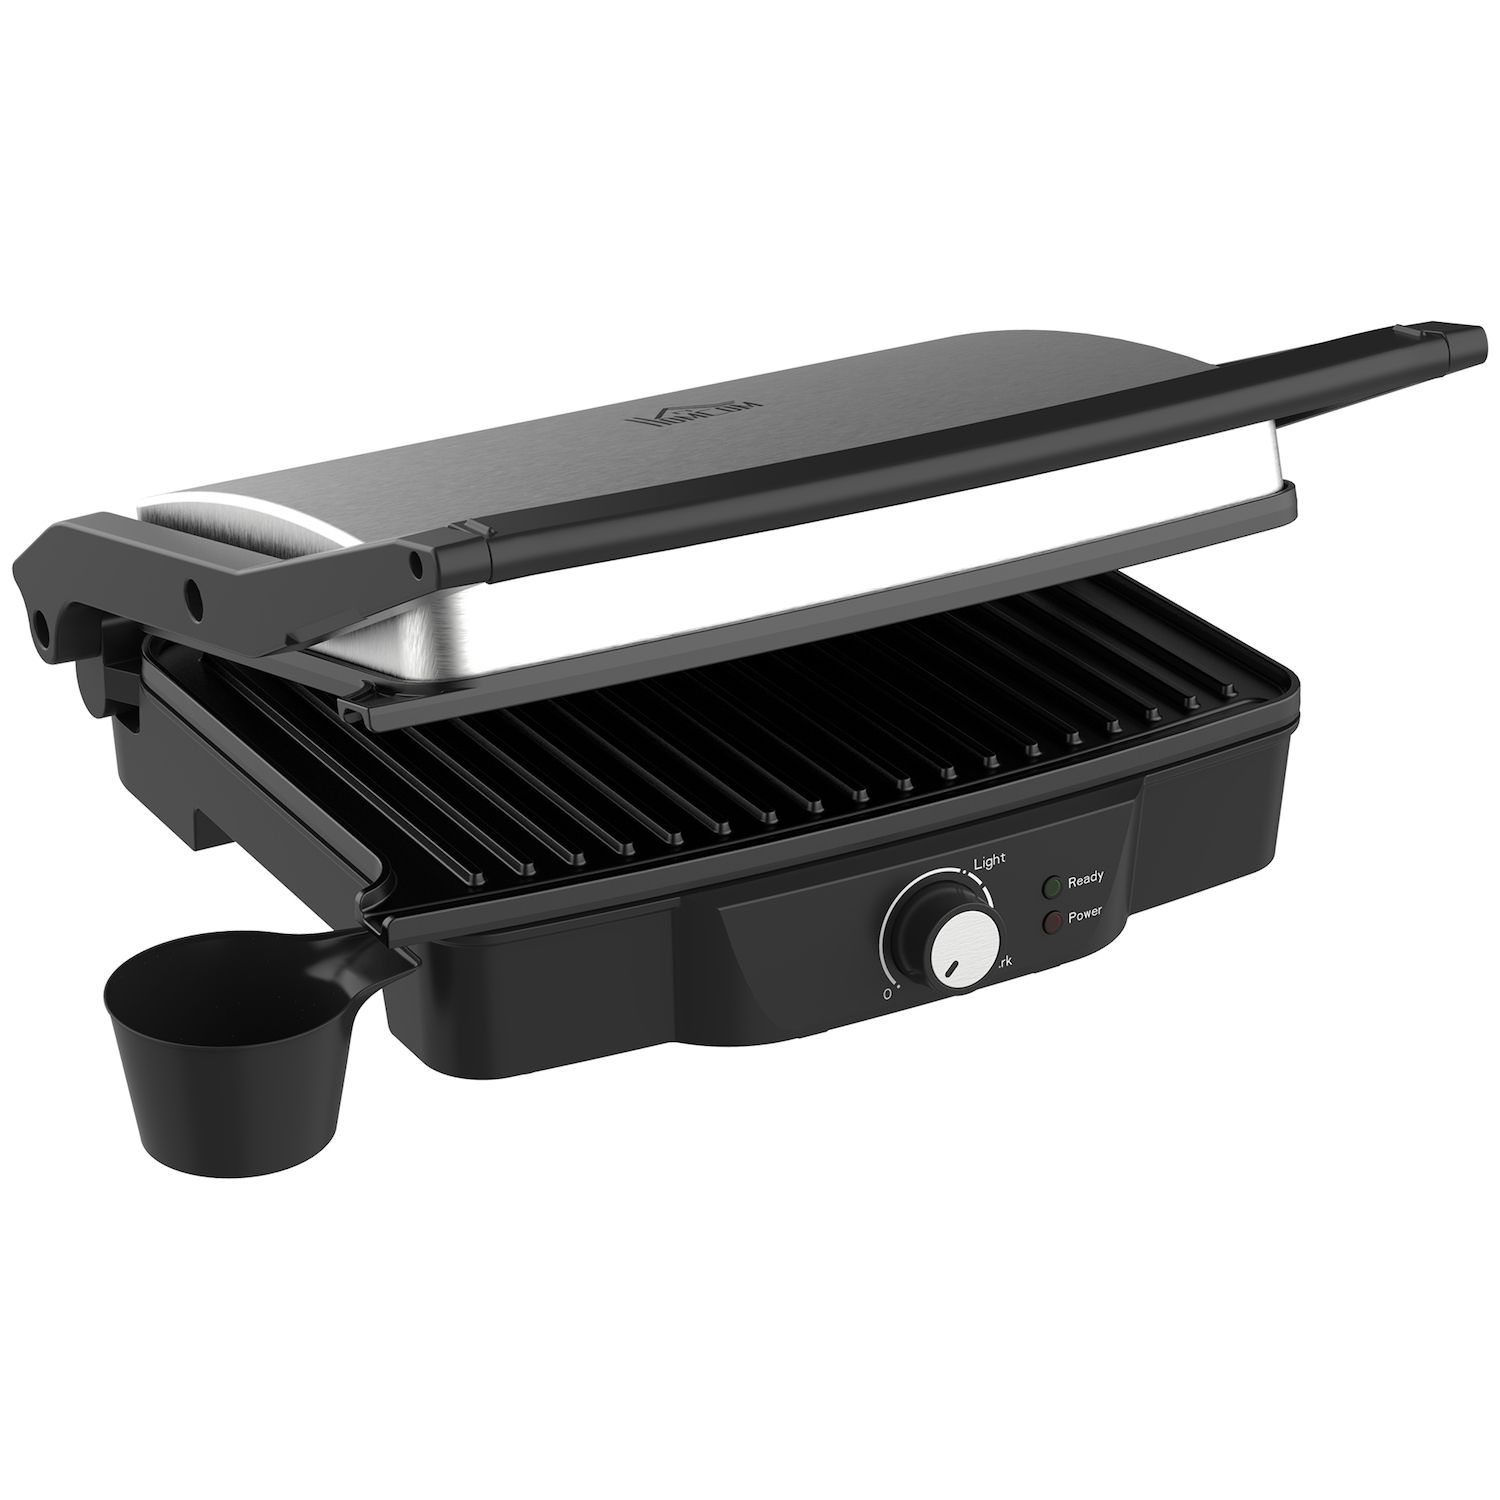 Best Buy: Chefman Electric 4 Slice Panini Press Grill and Sandwich